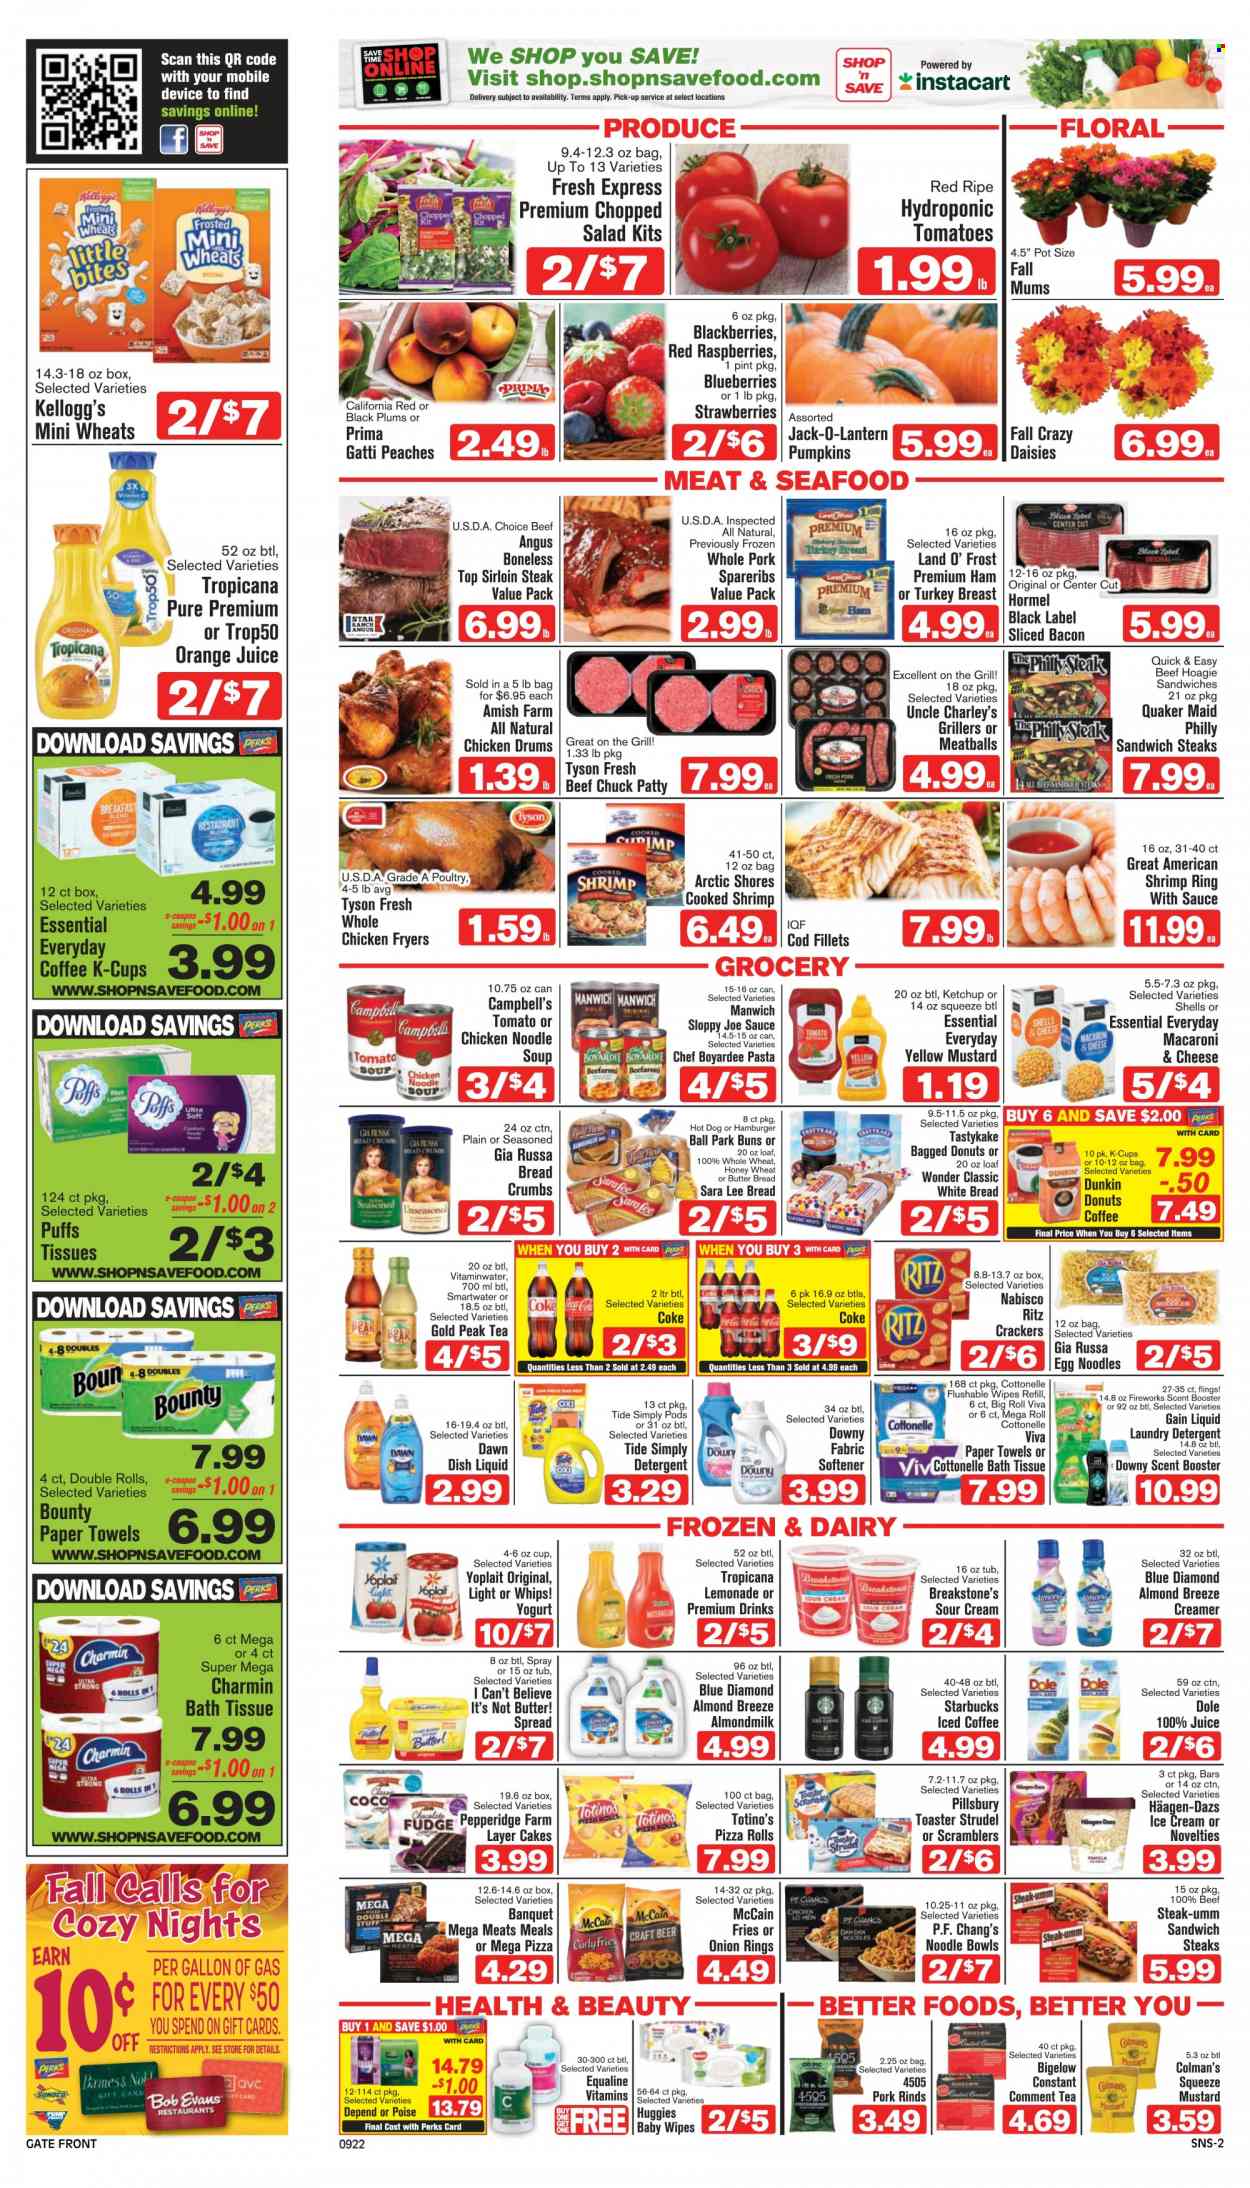 thumbnail - Shop ‘n Save Flyer - 09/22/2022 - 09/28/2022 - Sales products - white bread, cake, pizza rolls, strudel, buns, Sara Lee, puffs, breadcrumbs, pumpkin, salad, Dole, blackberries, blueberries, strawberries, watermelon, plums, pears, turkey breast, whole chicken, beef meat, beef sirloin, beef steak, steak, sirloin steak, hamburger, Bob Evans, pork spare ribs, cod, seafood, shrimps, Arctic Shores, Campbell's, macaroni & cheese, tomato soup, hot dog, pizza, onion rings, meatballs, soup, pasta, Pillsbury, noodles cup, Quaker, noodles, Hormel, bacon, ham, yoghurt, Yoplait, almond milk, Almond Breeze, I Can't Believe It's Not Butter, sour cream, creamer, ice cream, Häagen-Dazs, curly potato fries, McCain, potato fries, fudge, Bounty, crackers, Kellogg's, Little Bites, RITZ, Manwich, Chef Boyardee, egg noodles, mustard, ketchup, Blue Diamond, Coca-Cola, lemonade, orange juice, juice, Gold Peak Tea, Smartwater, iced coffee, tea, Starbucks, coffee capsules, K-Cups, breakfast blend, beer, bath tissue, Cottonelle, wipes, kitchen towels, paper towels, Charmin, detergent, Gain, Tide, fabric softener, laundry detergent, Downy Laundry, dishwashing liquid, vitamin c, black plums, peaches. Page 2.